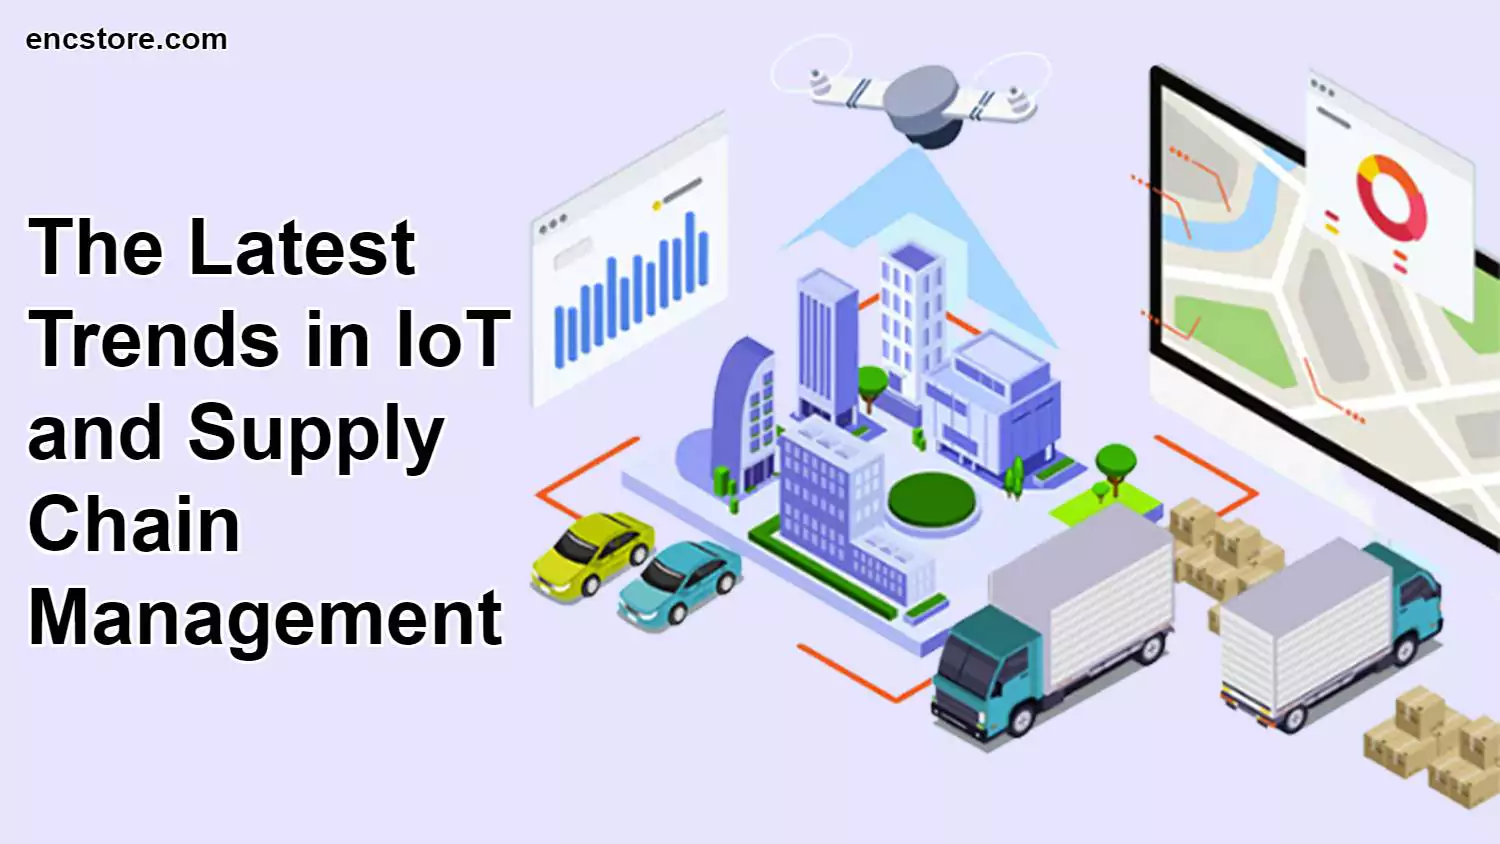 The Latest Trends in IoT and Supply Chain Management